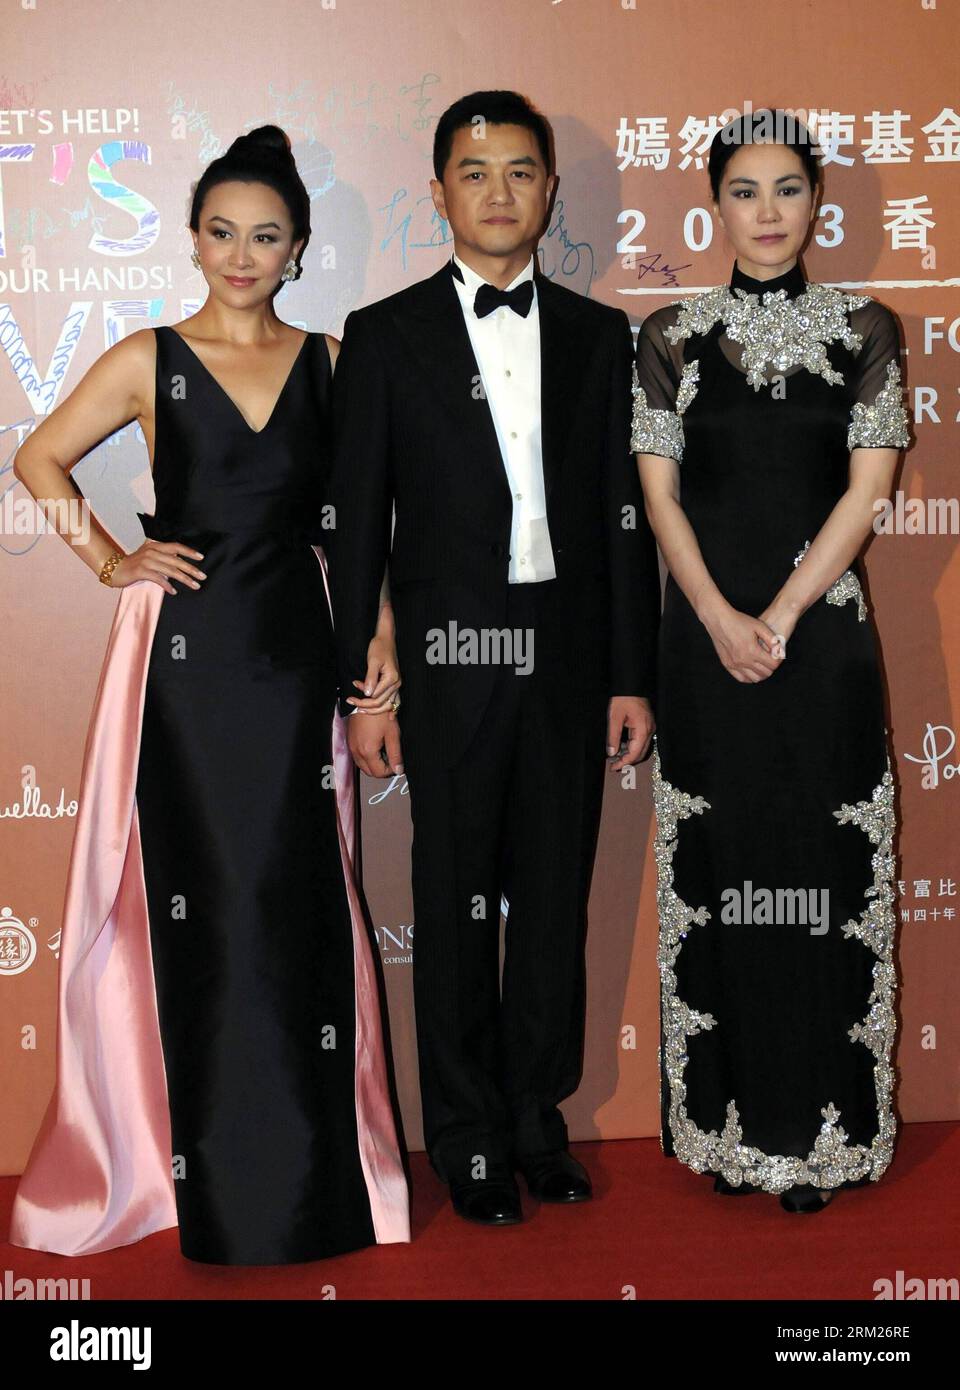 Bildnummer: 59720242  Datum: 27.05.2013  Copyright: imago/Xinhua Carina Lau, Li Yapeng and Faye Wong (from L to R) attend the 2013 Gala Dinner of the SmileAngel Foundation in Hong Kong, south China, May 27, 2013. The dinner for celebrating the first anniversary of the establishment of both the foundation and the Beijing SmileAngel Children s Hospital raised 56.196 million Hong Kong dollars Monday night. (Xinhua/Zhu Xinyu) (zwx) CHINA-HONG KONG-SMILEANGEL FOUNDATION-GALA DINNER (CN) PUBLICATIONxNOTxINxCHN Entertainment People premiumd x0x xkg 2013 hoch     59720242 Date 27 05 2013 Copyright Ima Stock Photo